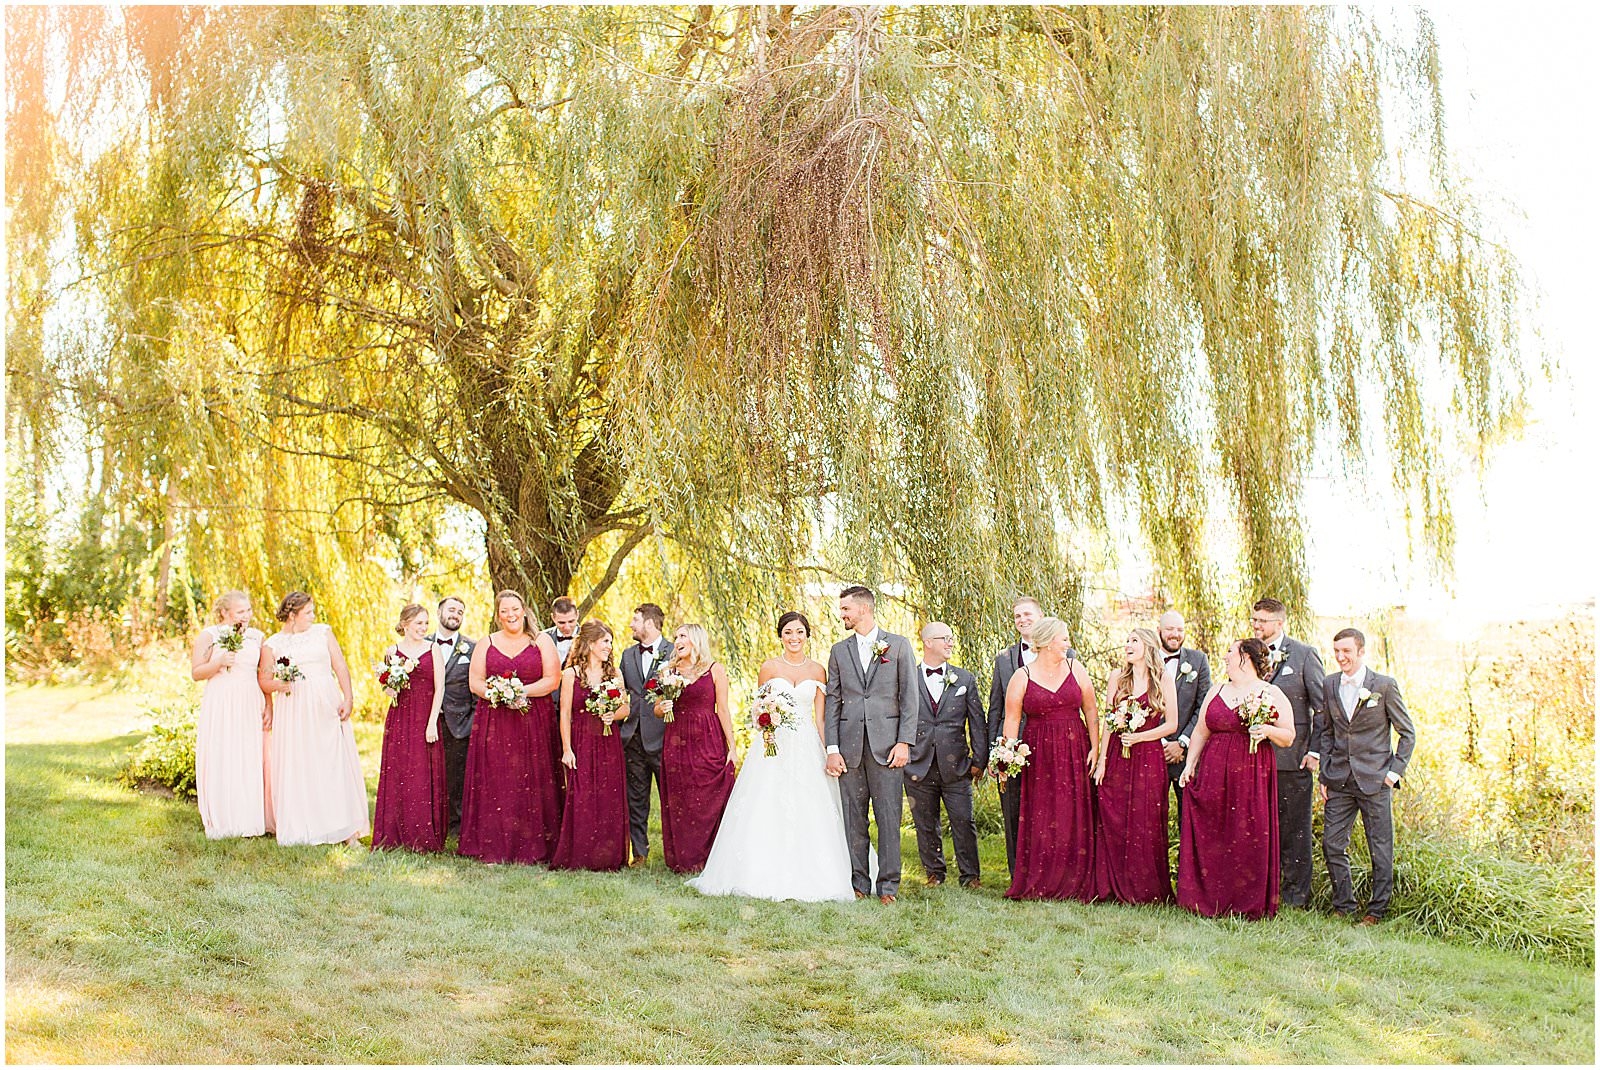 A Stunning Fall Wedding in Indianapolis, IN |. Sally and Andrew | Bret and Brandie Photography 0098.jpg